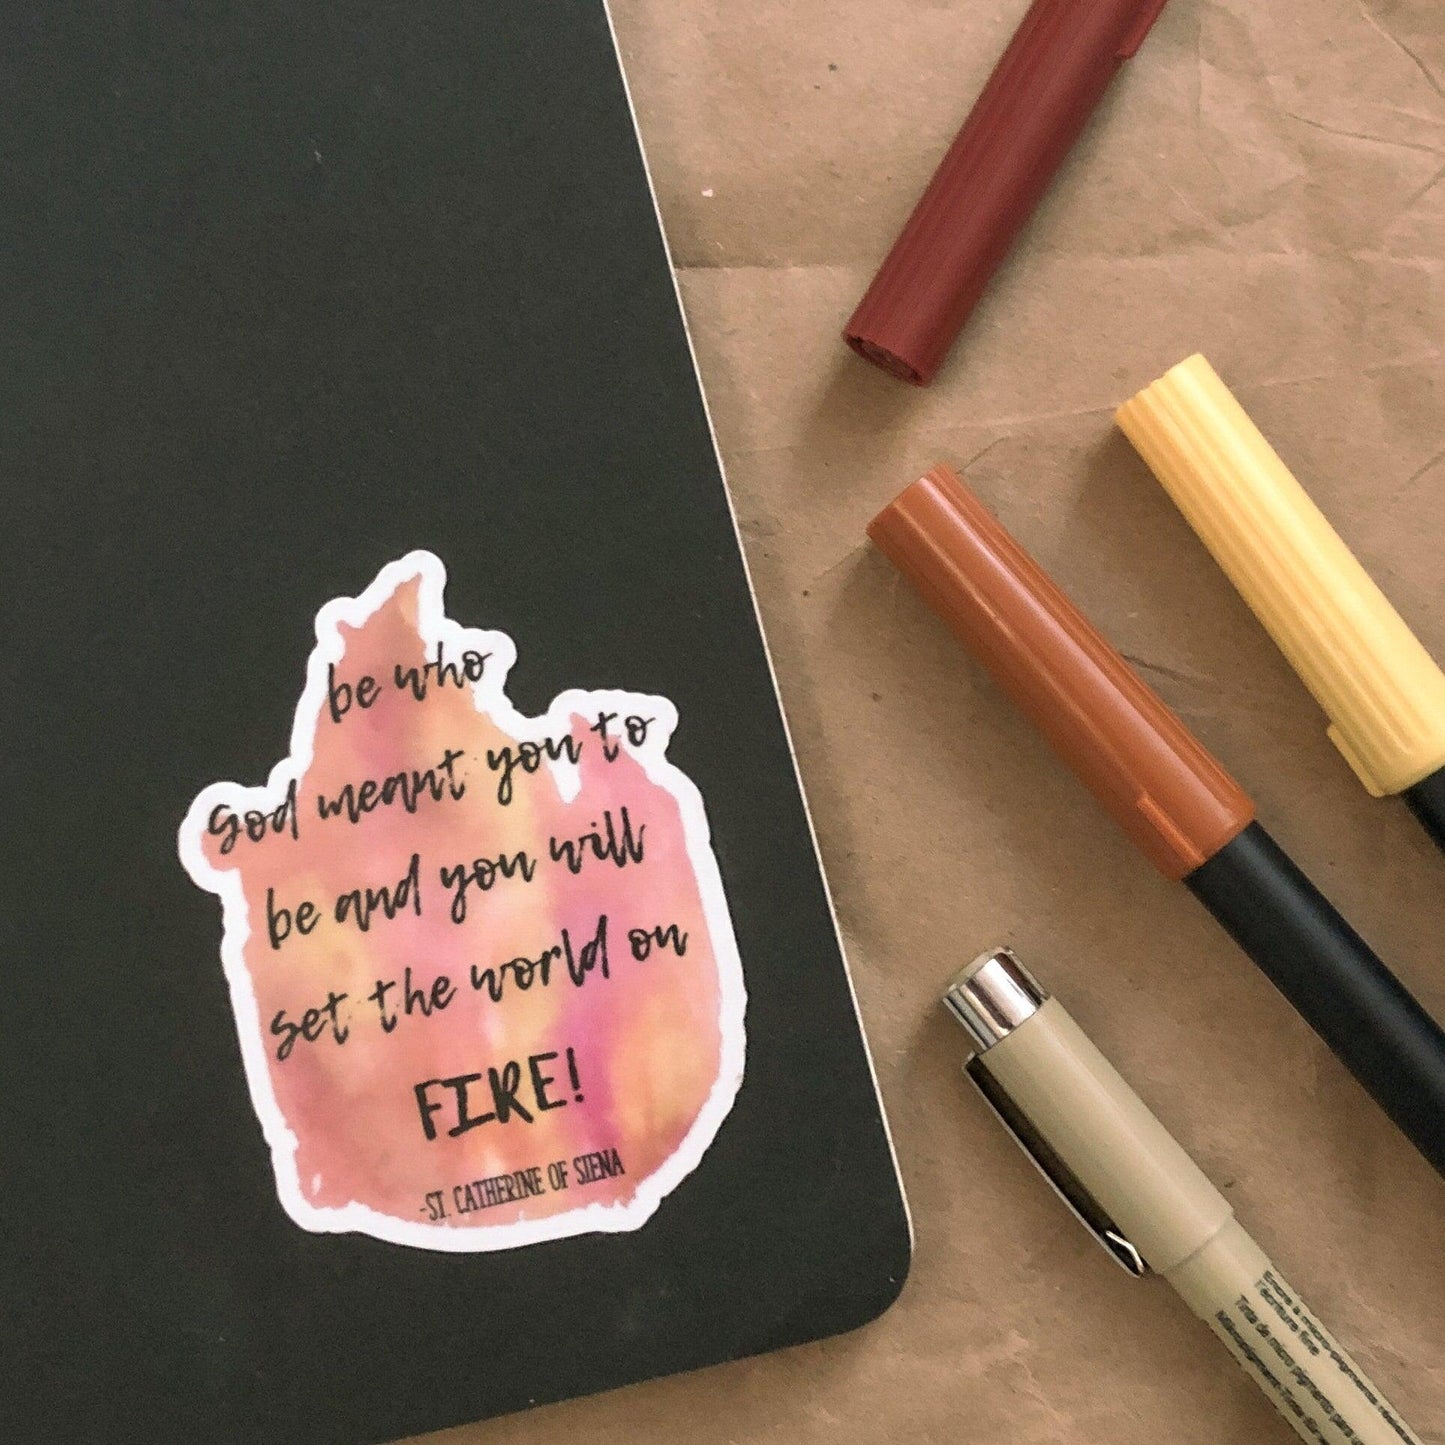 Be Who God Meant You To Be - Sticker